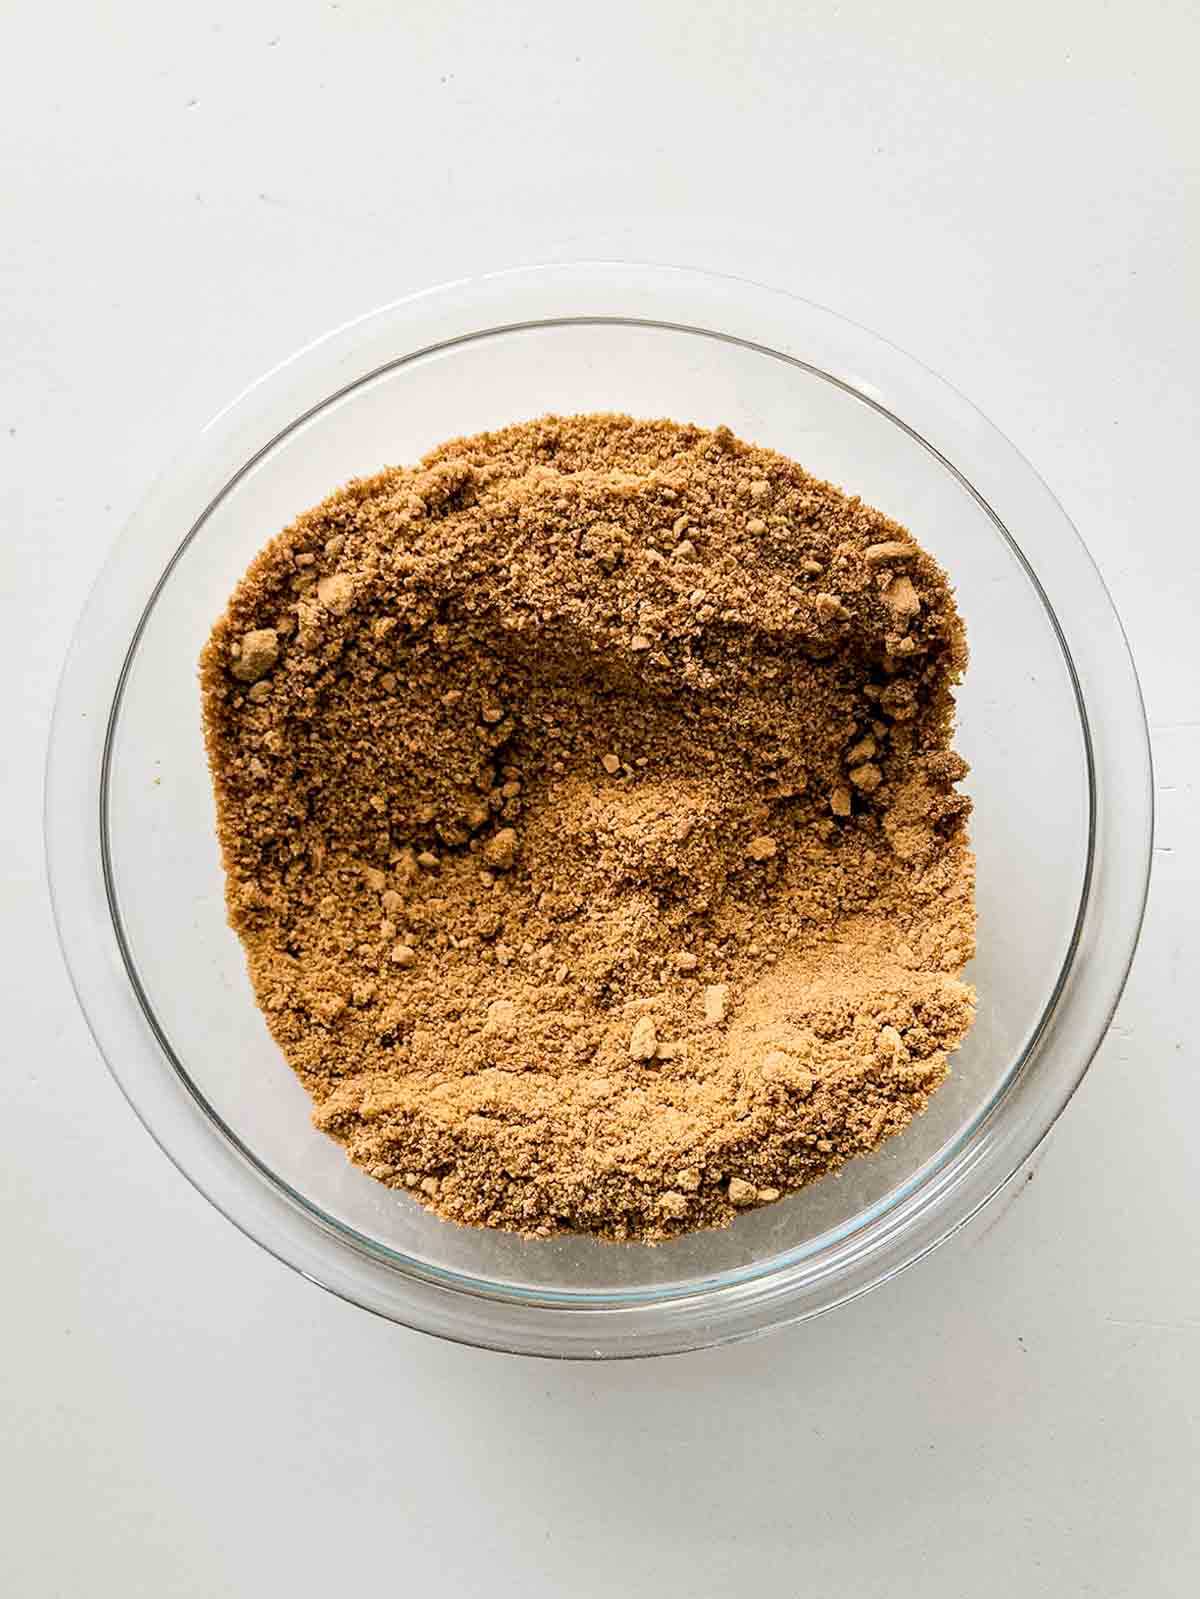 Brown, dry ingredients in a glass bowl after mixing.